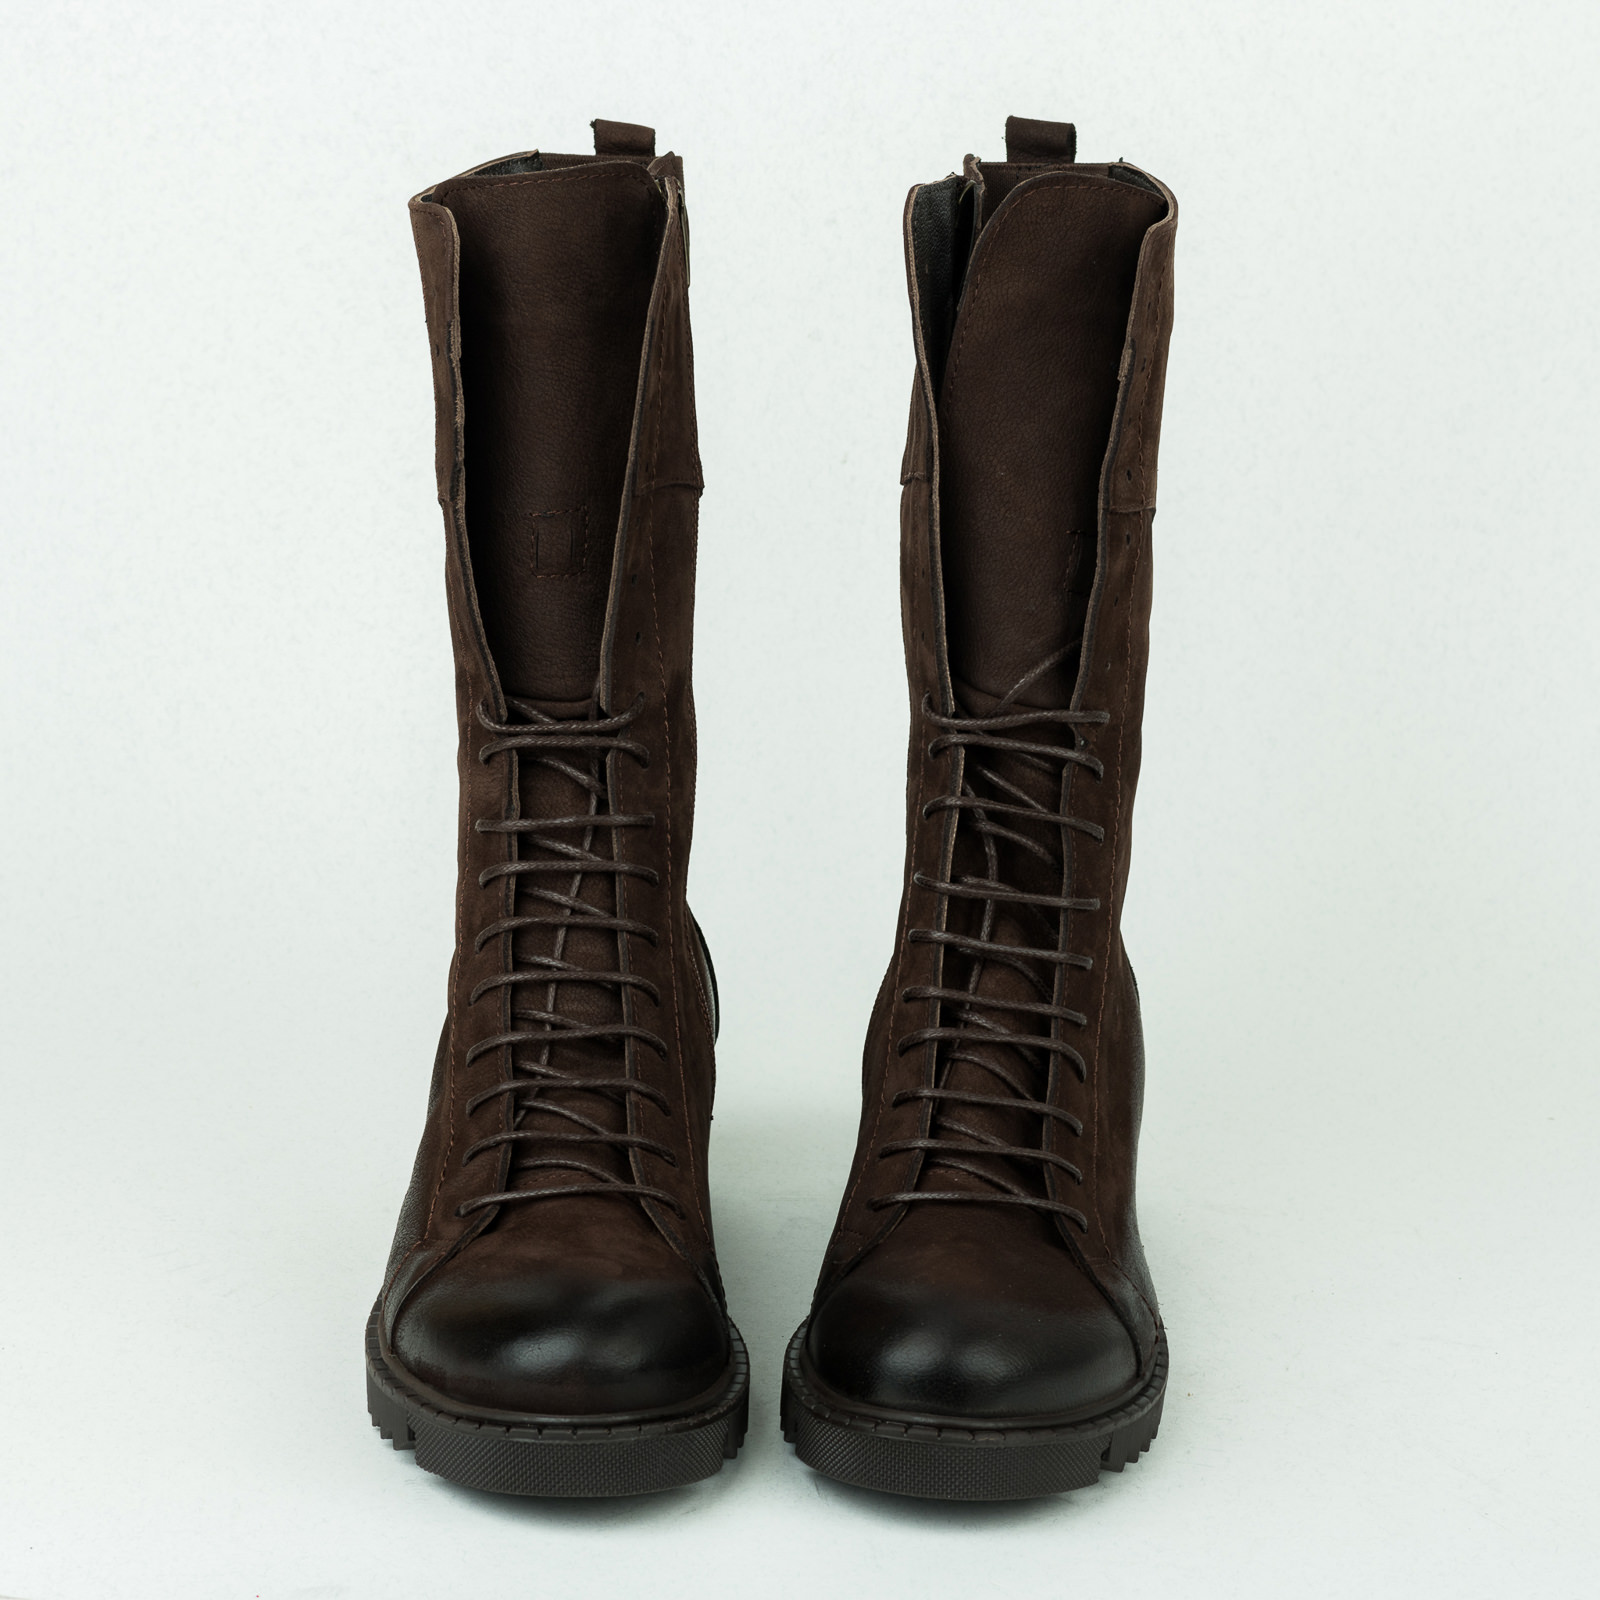 Leather ankle boots B314 - DARK BROWN